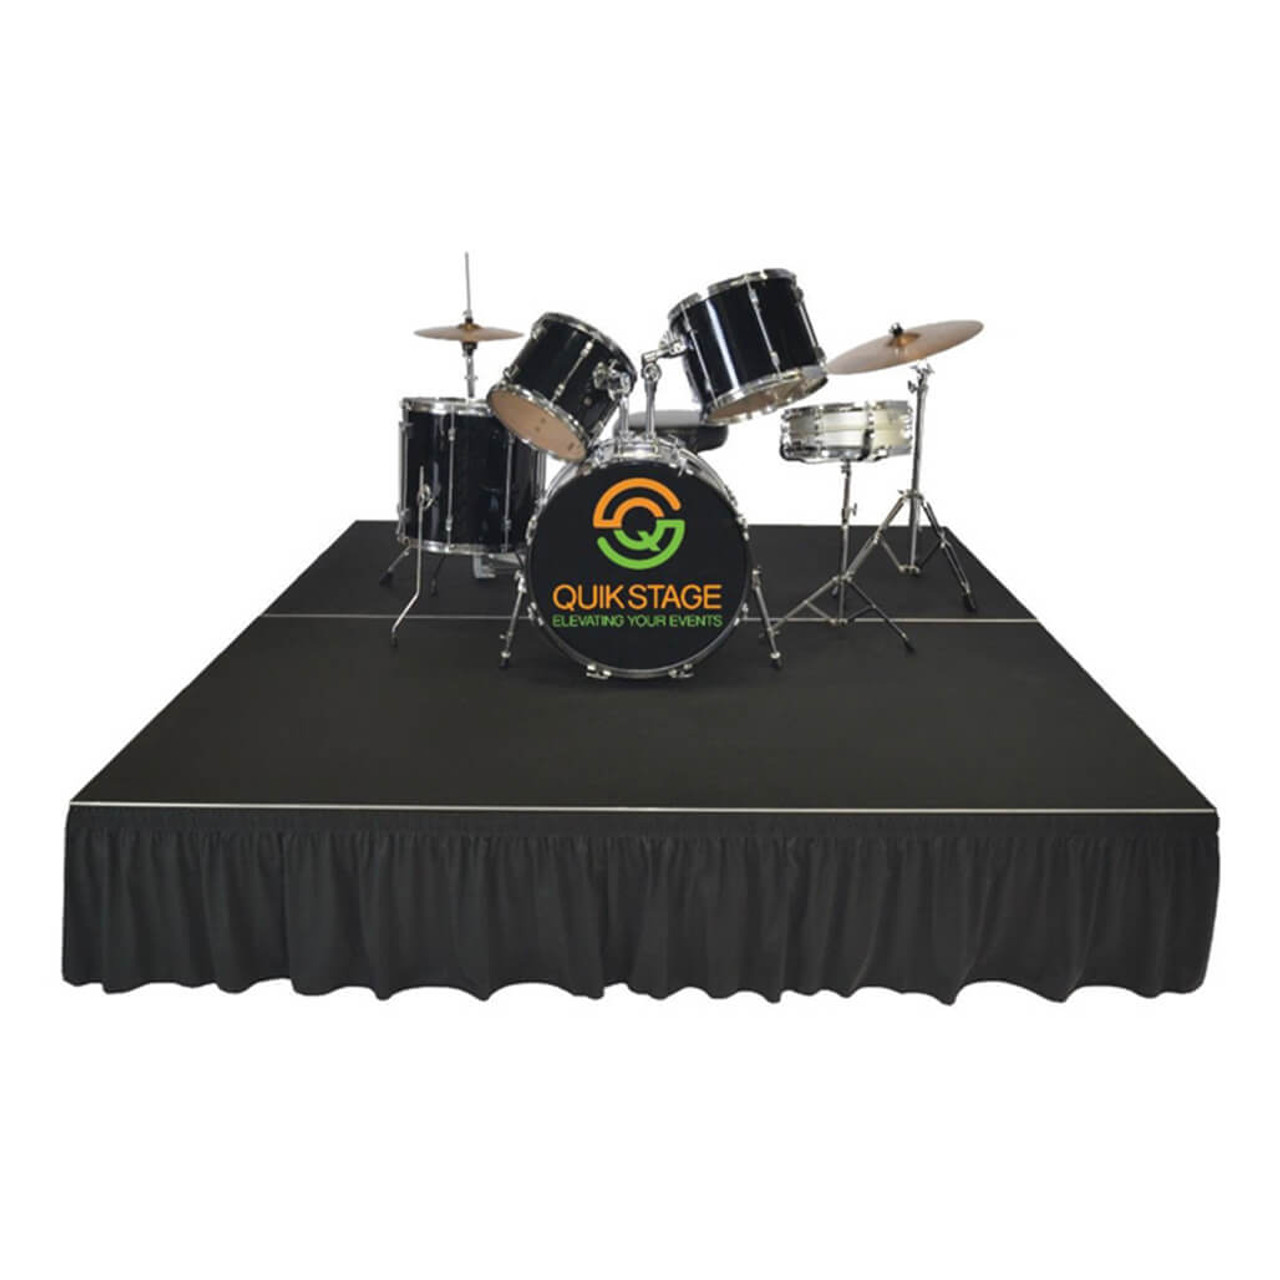 Top reviewed Quik Stage 8' x 28' High Portable Stage Package with Black Polyvinyl Non-Skid Surface. Additional Heights and Surfaces Available - Drum Riser with skirting